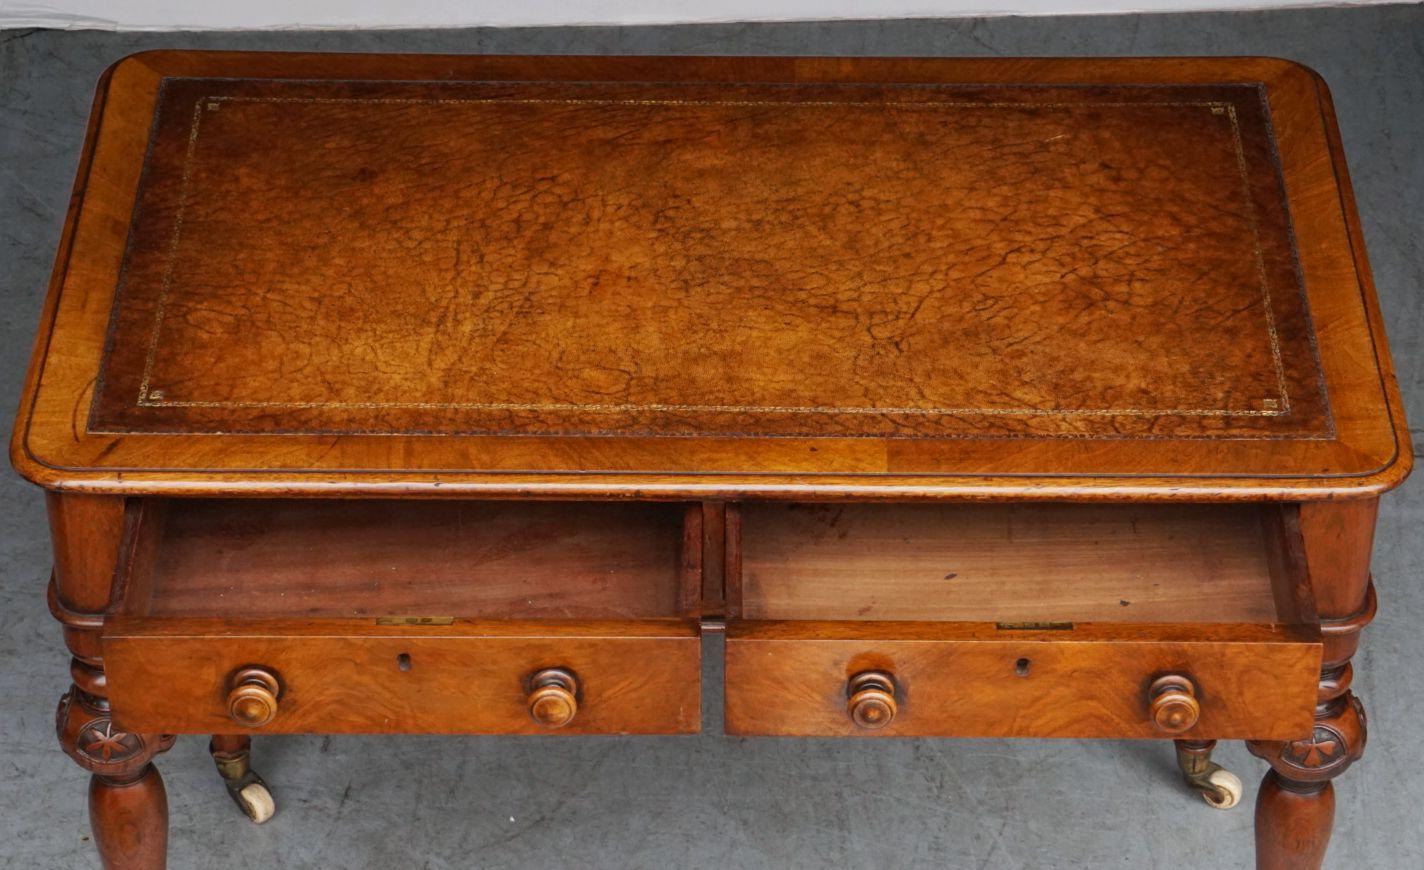 Metal English Writing Desk or Table of Mahogany with Leather Top from the 19th Century